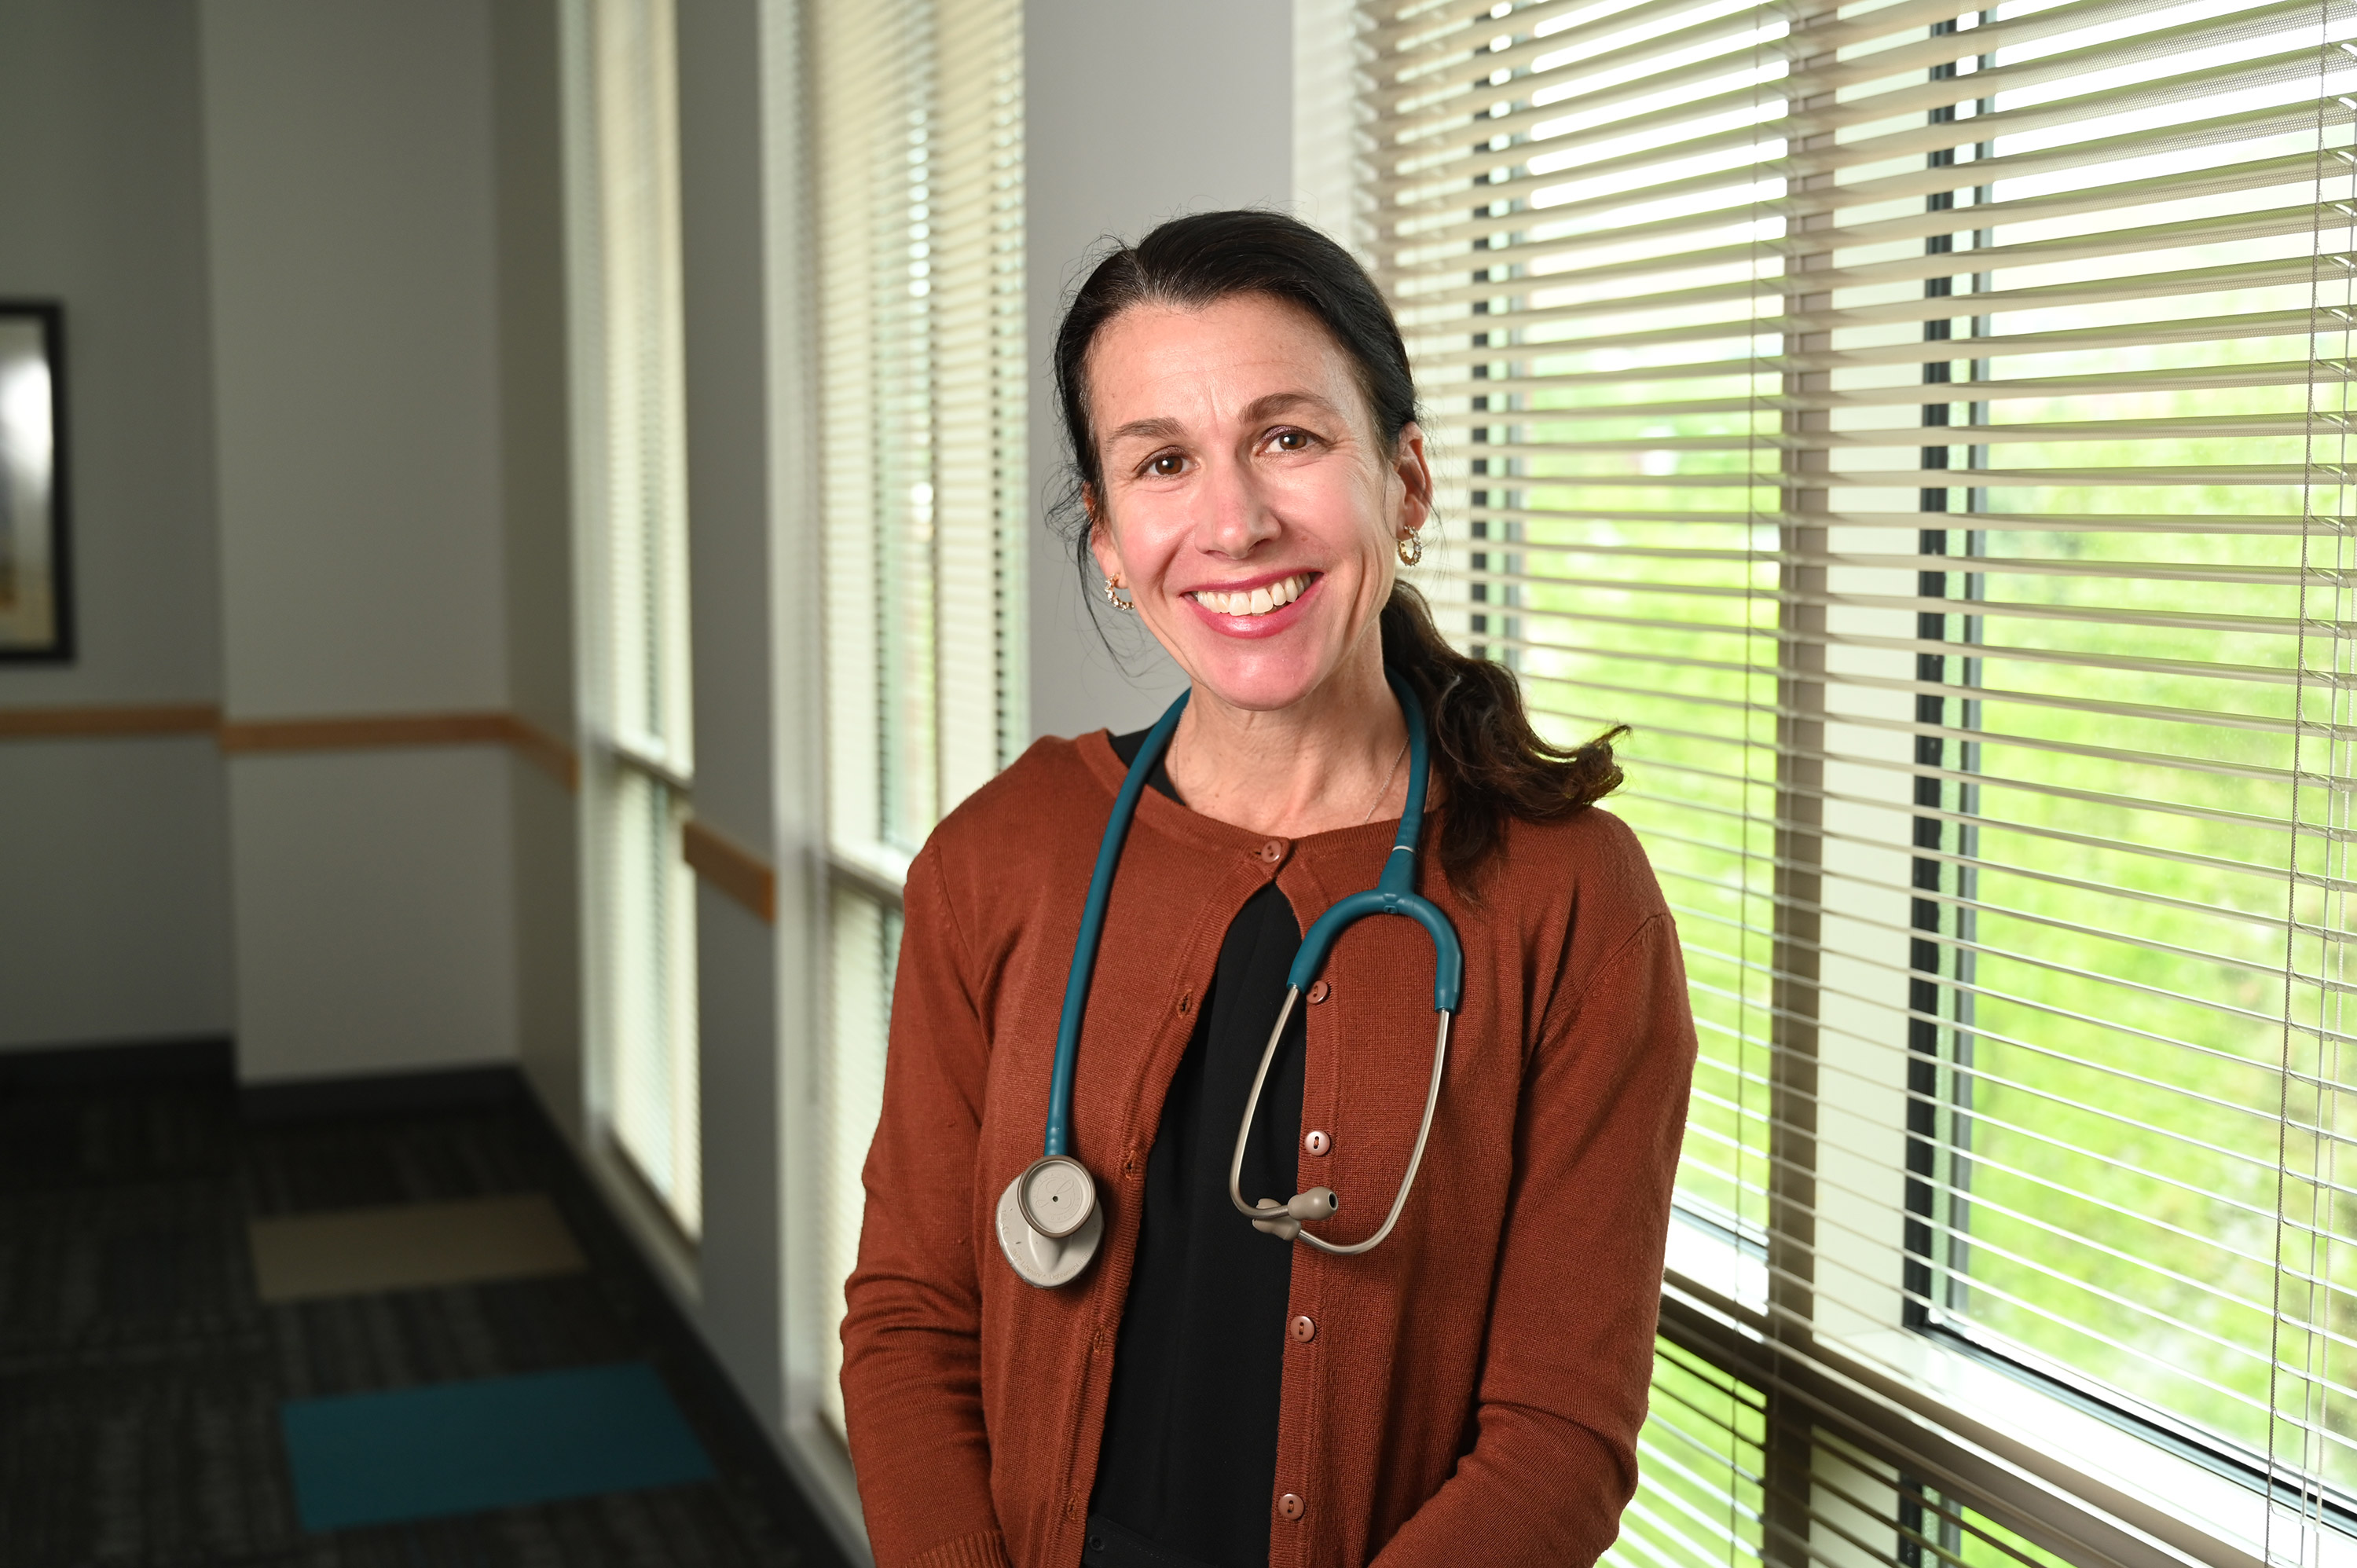 Dr. Tracy Frech, a VA rheumatologist, is working with VA-TEAM in hopes that her software aimed at benefiting Veterans with Raynaud’s phenomenon will eventually reach the marketplace. (Photo by Jeff Grandon)